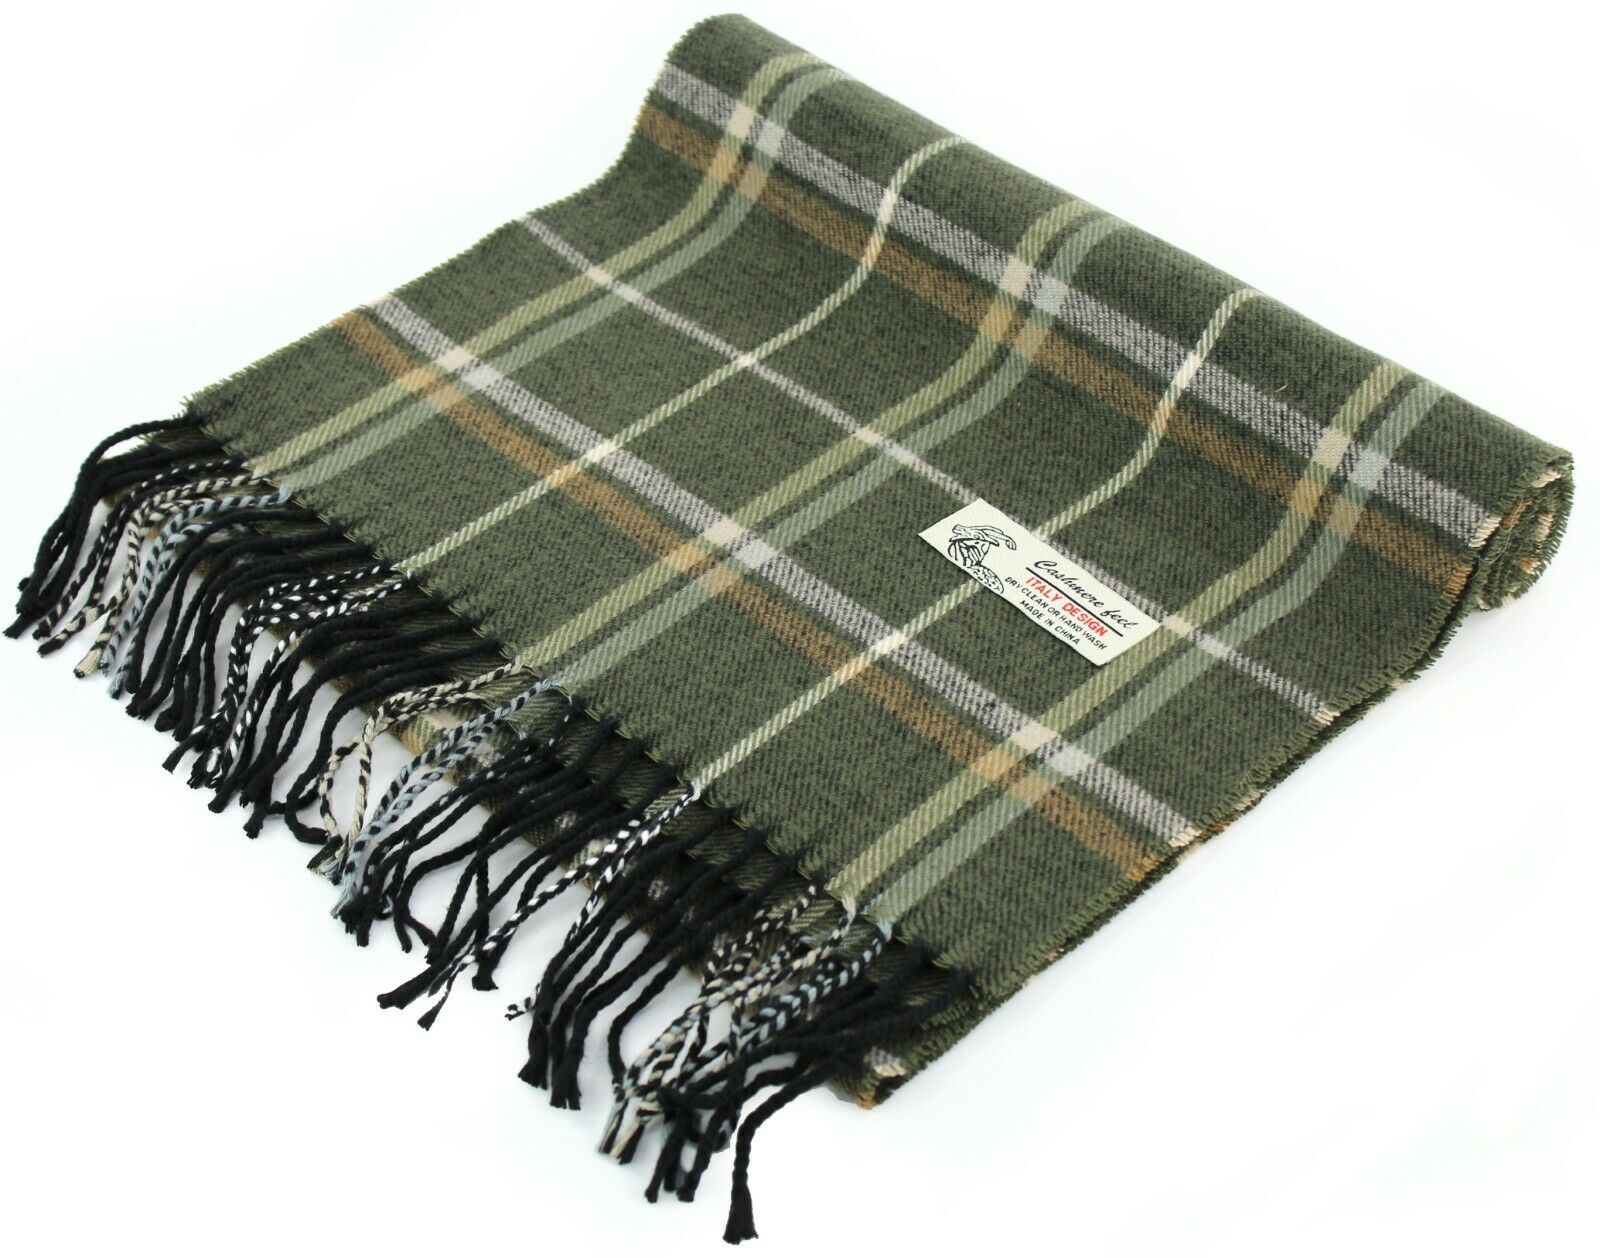 Super Soft Luxurious Classic Cashmere Feel Winter Scarf - image 2 of 2